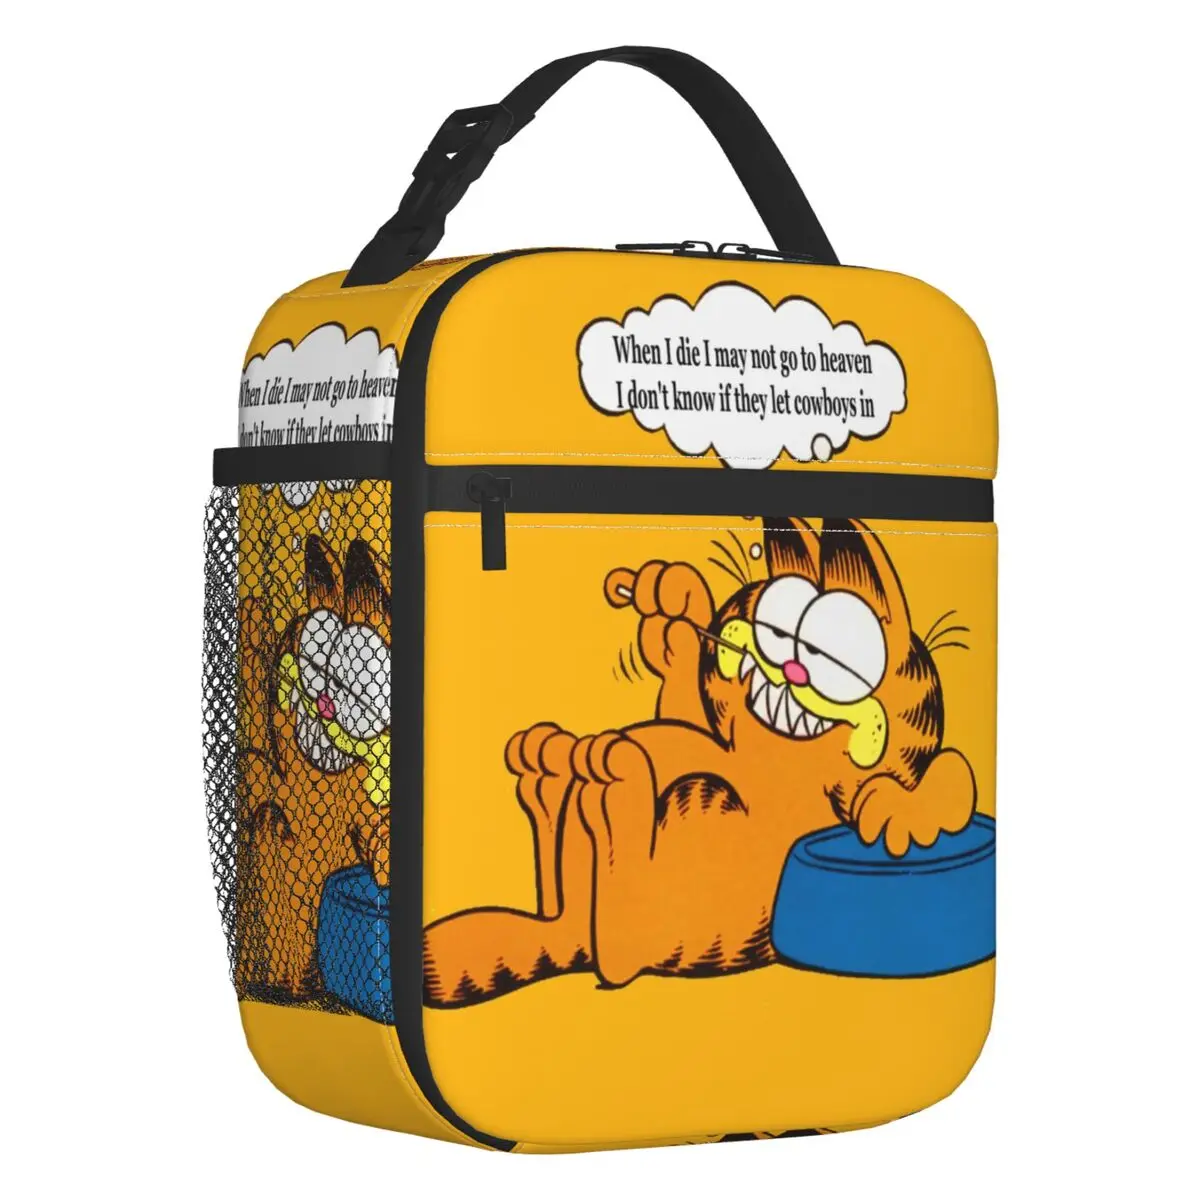 Funny Garfields Quote Insulated Lunch Bag for Work School Kawaii Cat Resuable Thermal Cooler Lunch